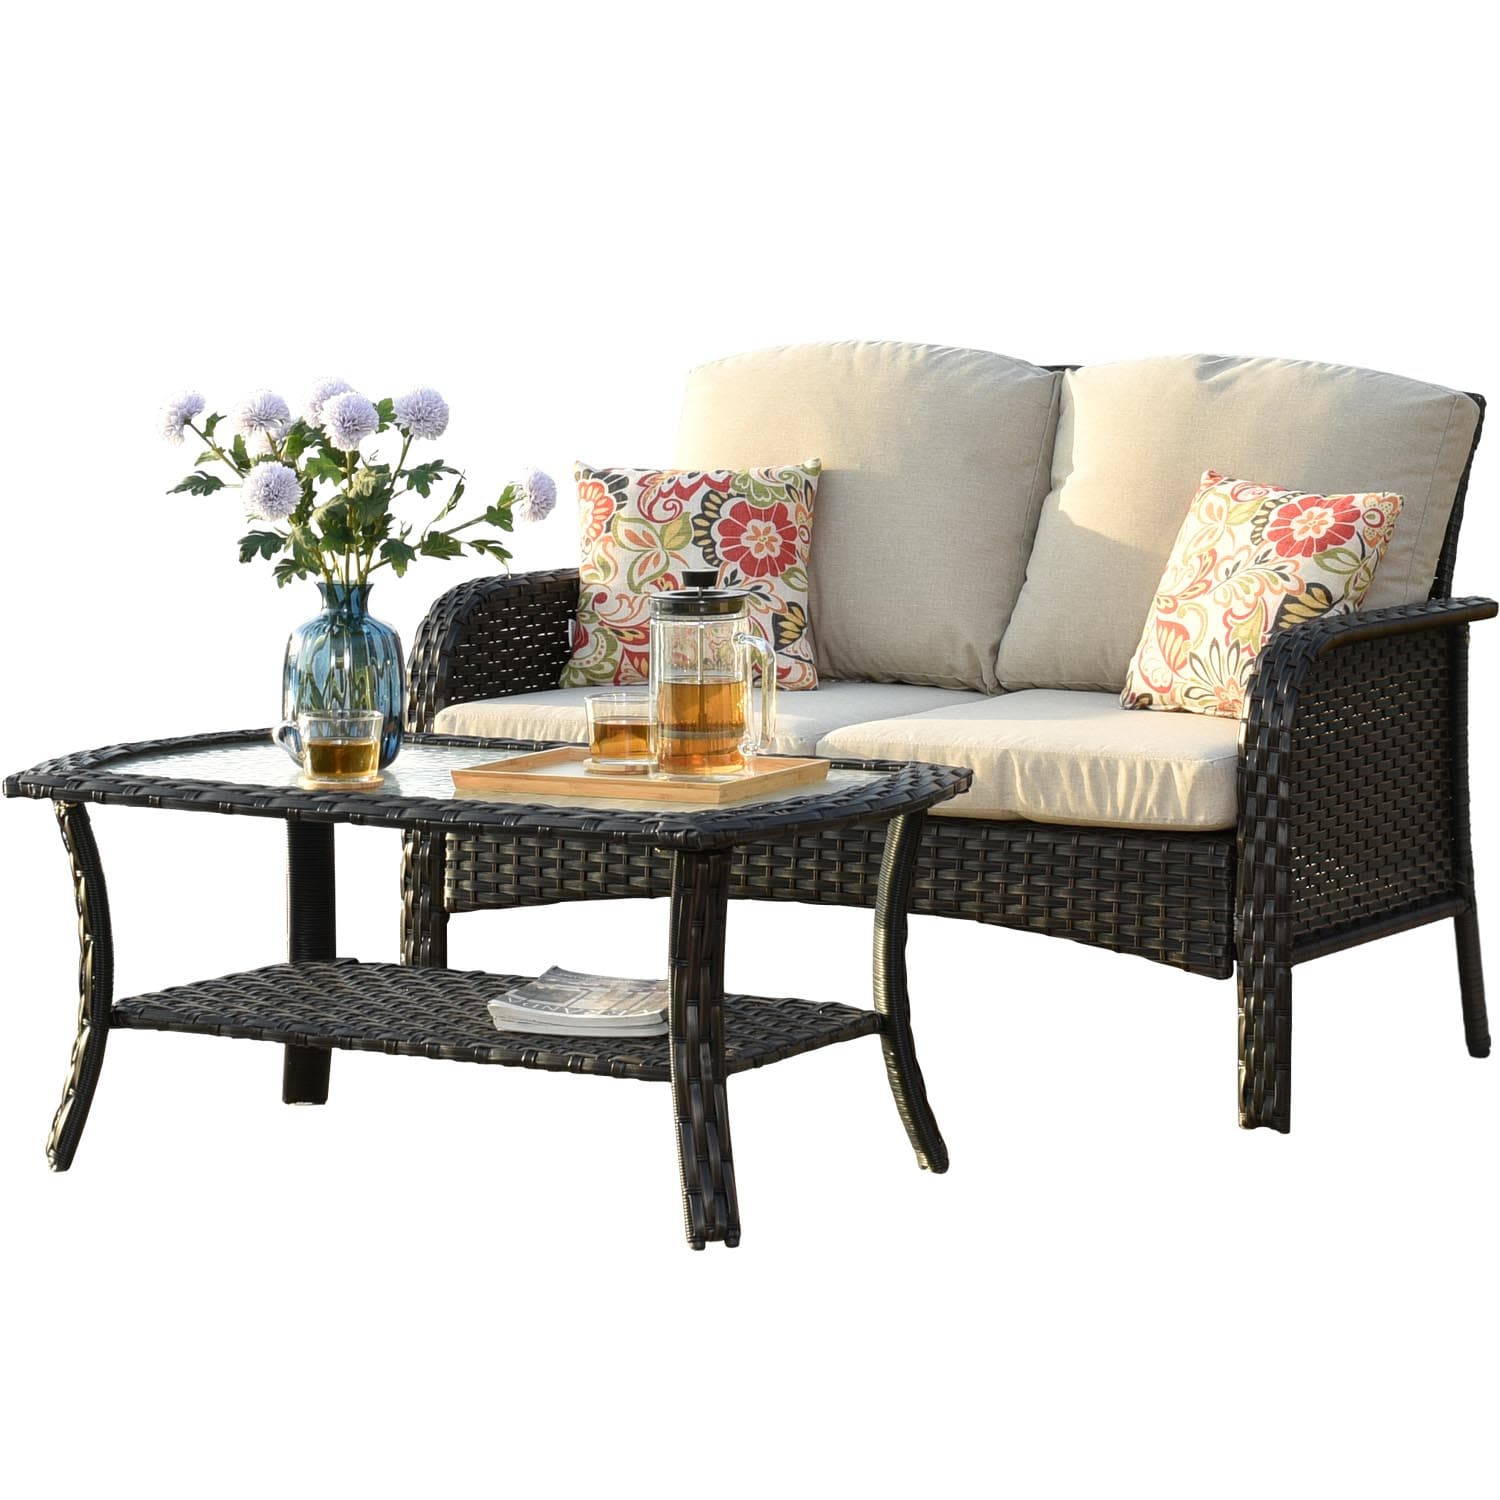 Ovios Outdoor Furniture 4 Piece High Back Brown Wicker with Cushion and Table